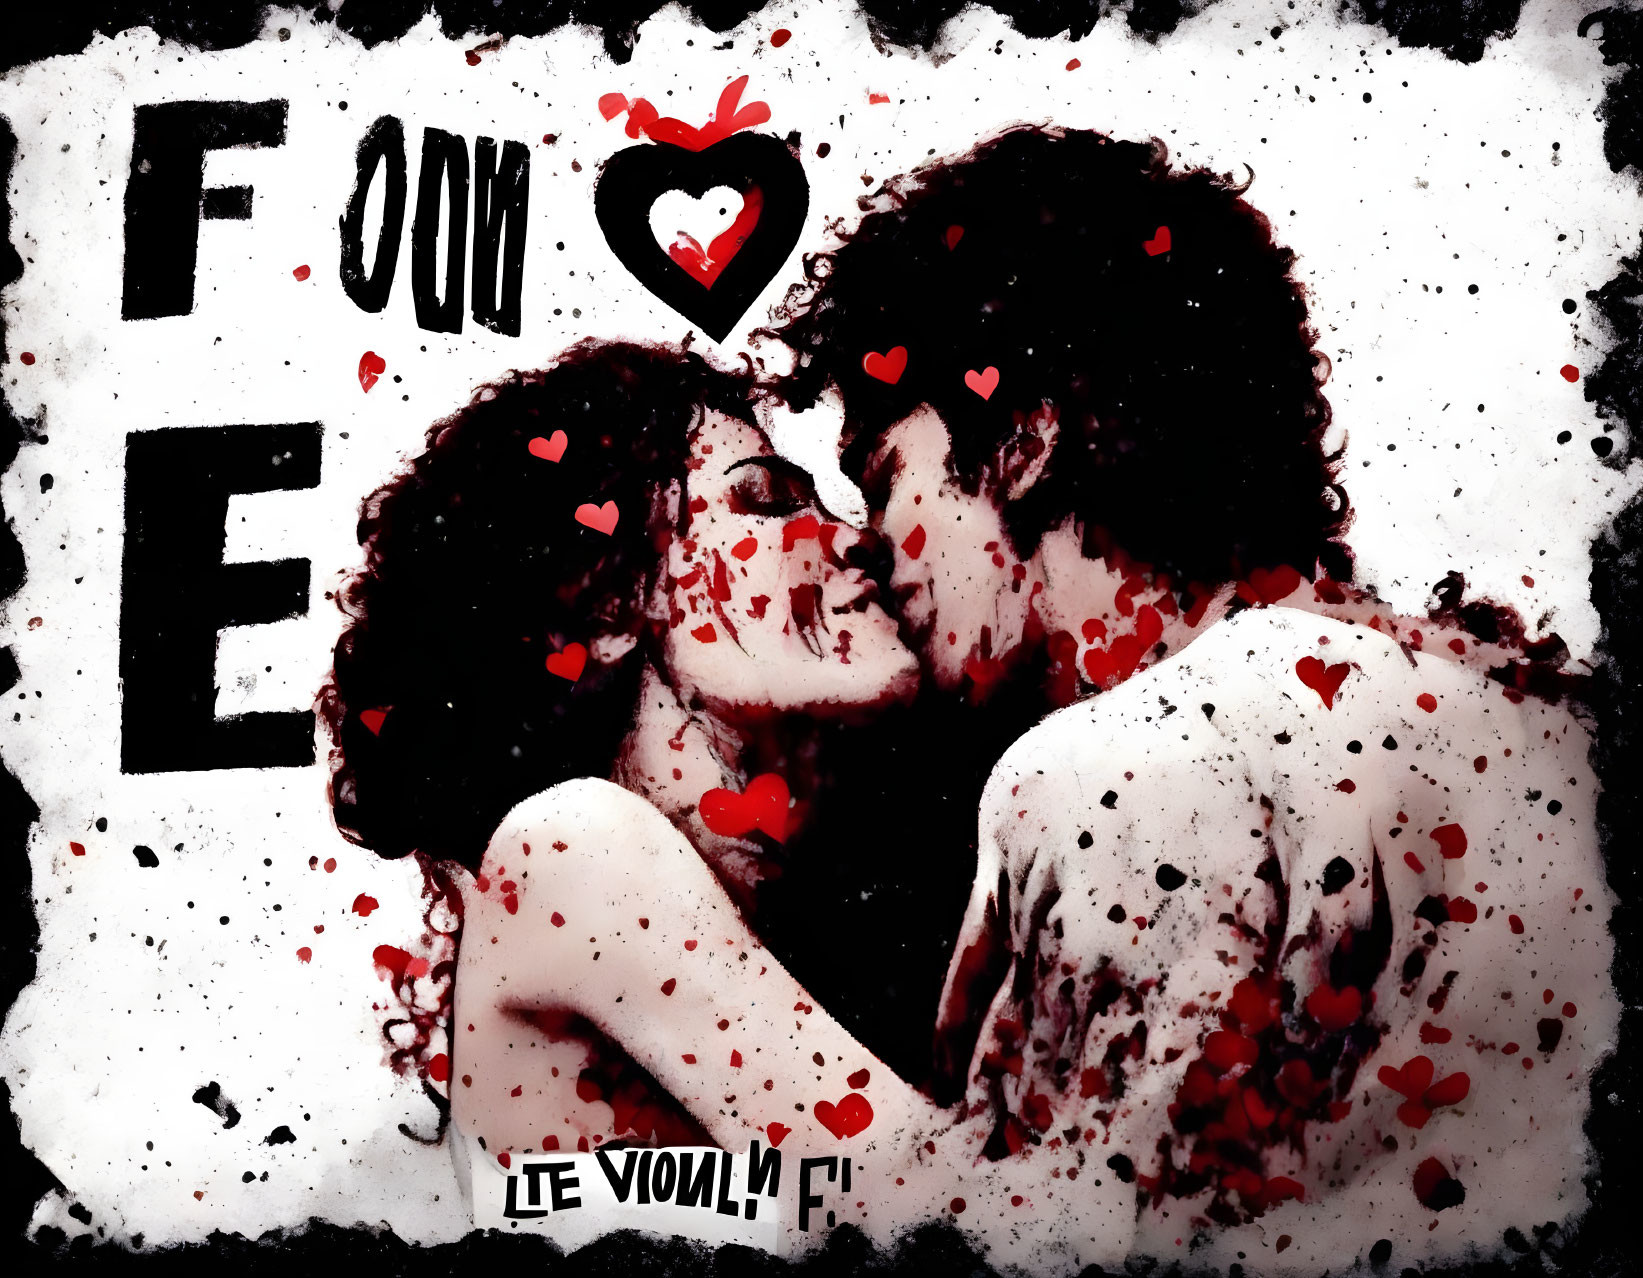 Stylized image of kissing couple with red accents and "LOVE" words